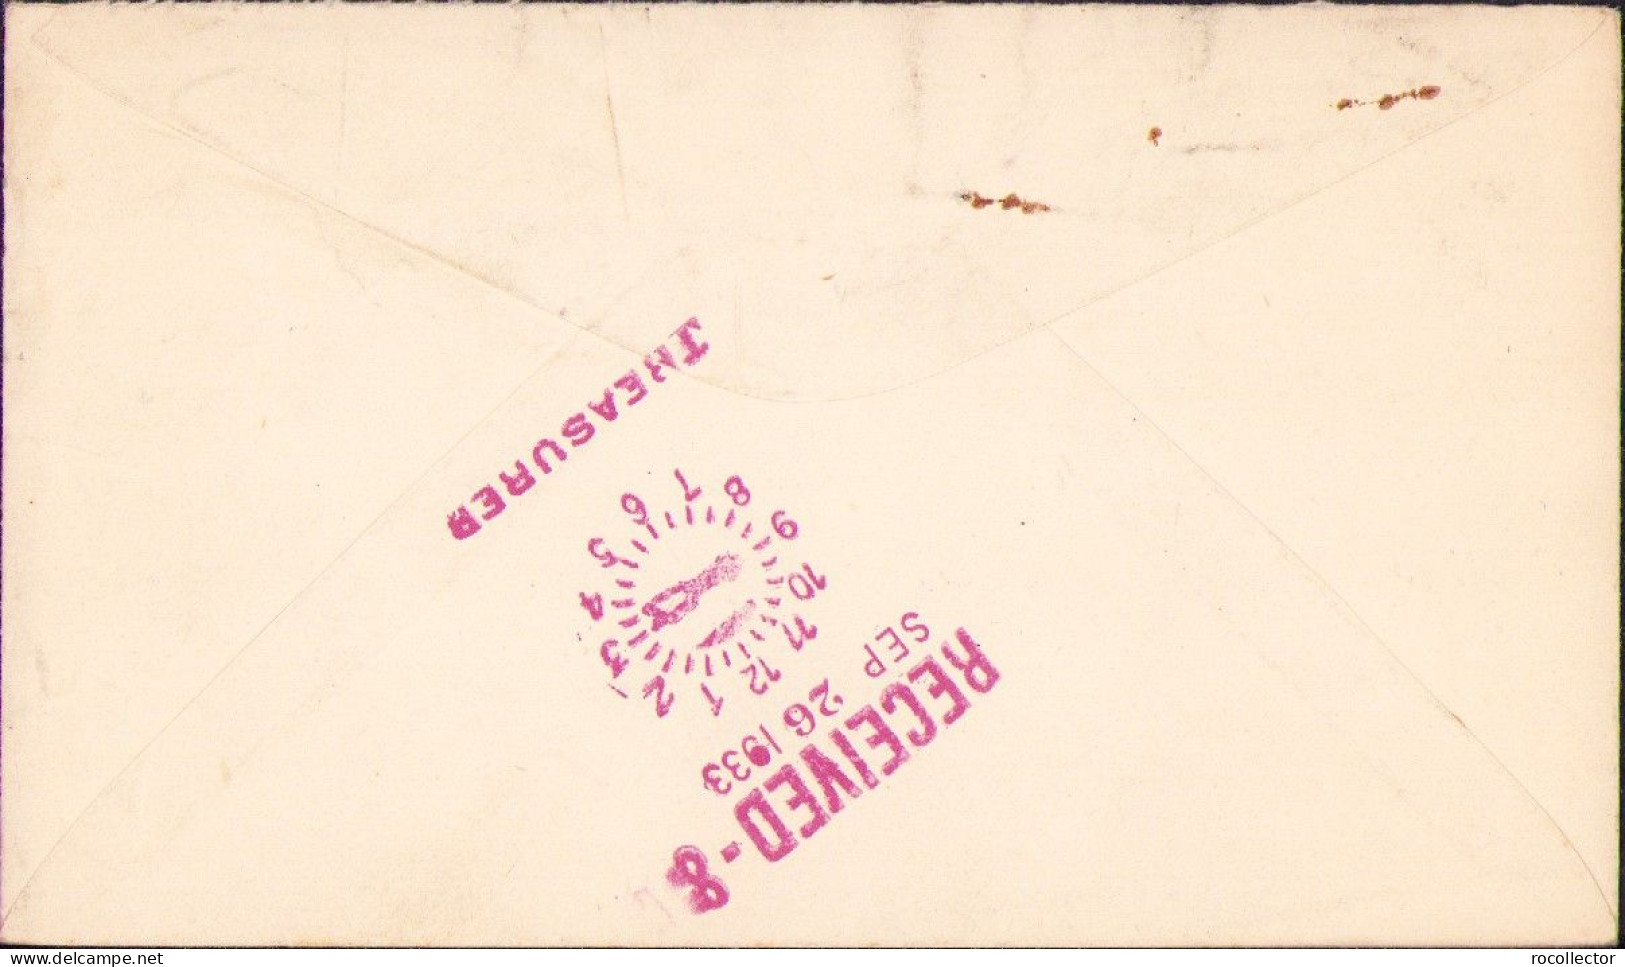 Envelope With 3 Cents NRA National Recovery Act USA 1933 Stamp Circulated Fresno, CA – Scranton, PA A2498N - Collections